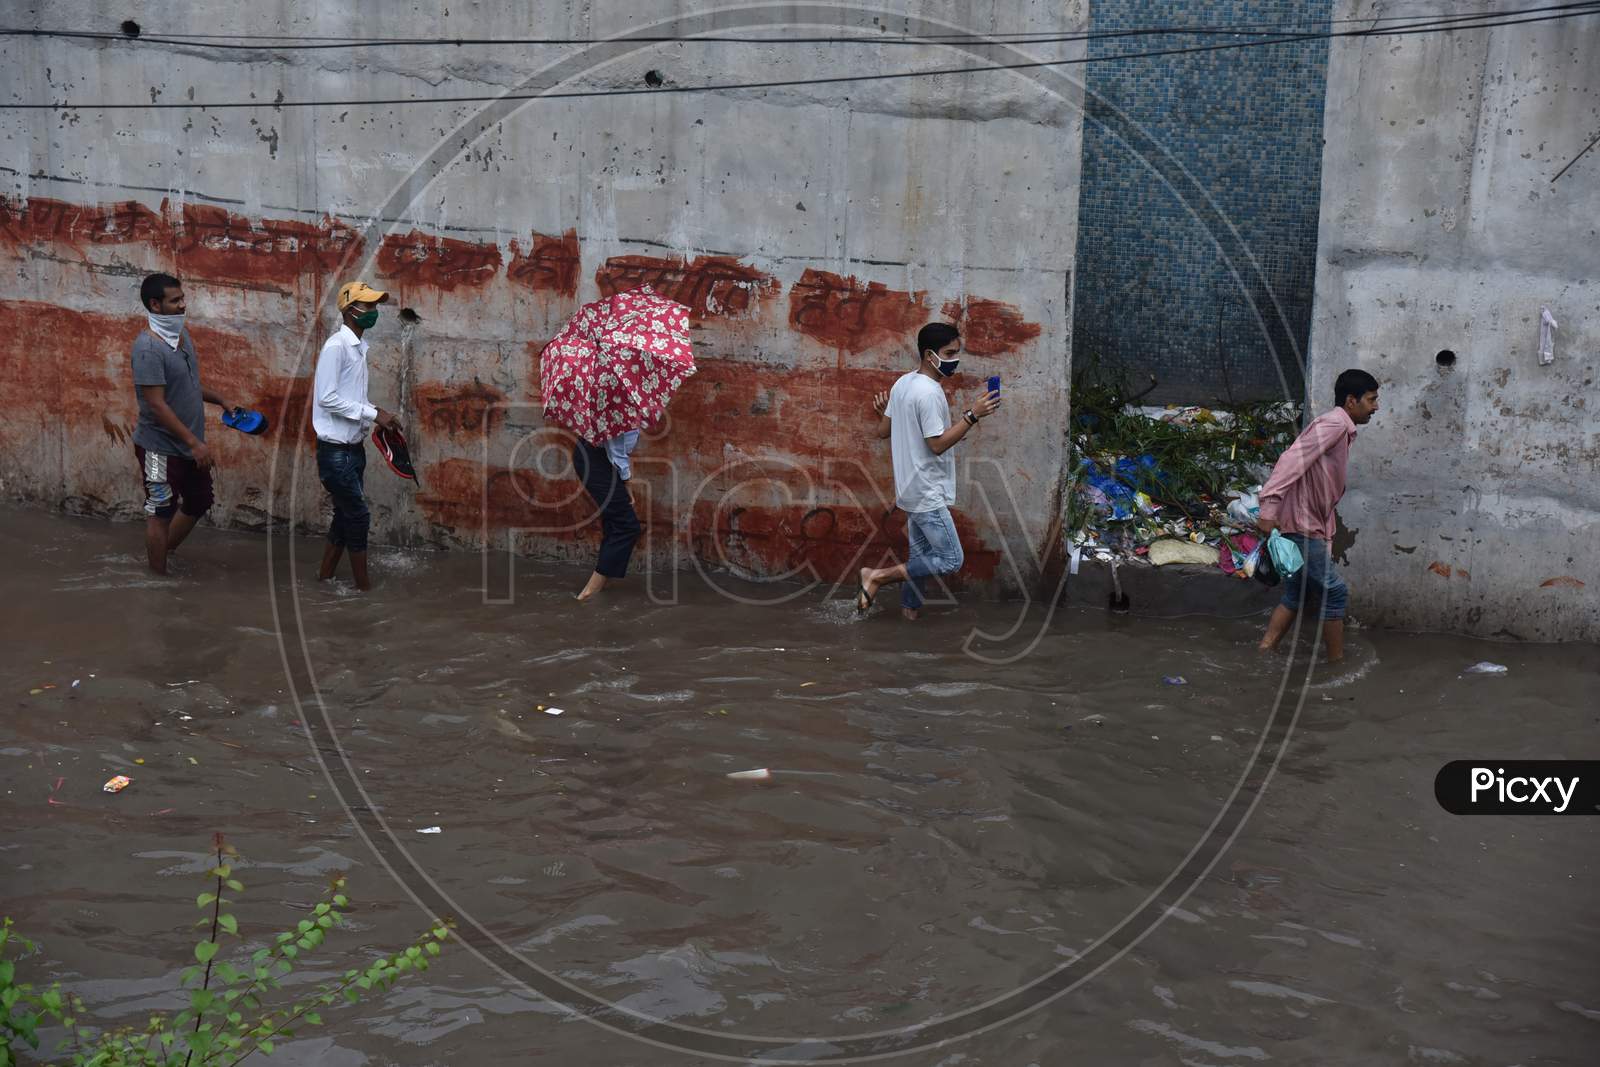 People cross a flooded street during heavy rains in New Delhi, India, August 19, 2020.